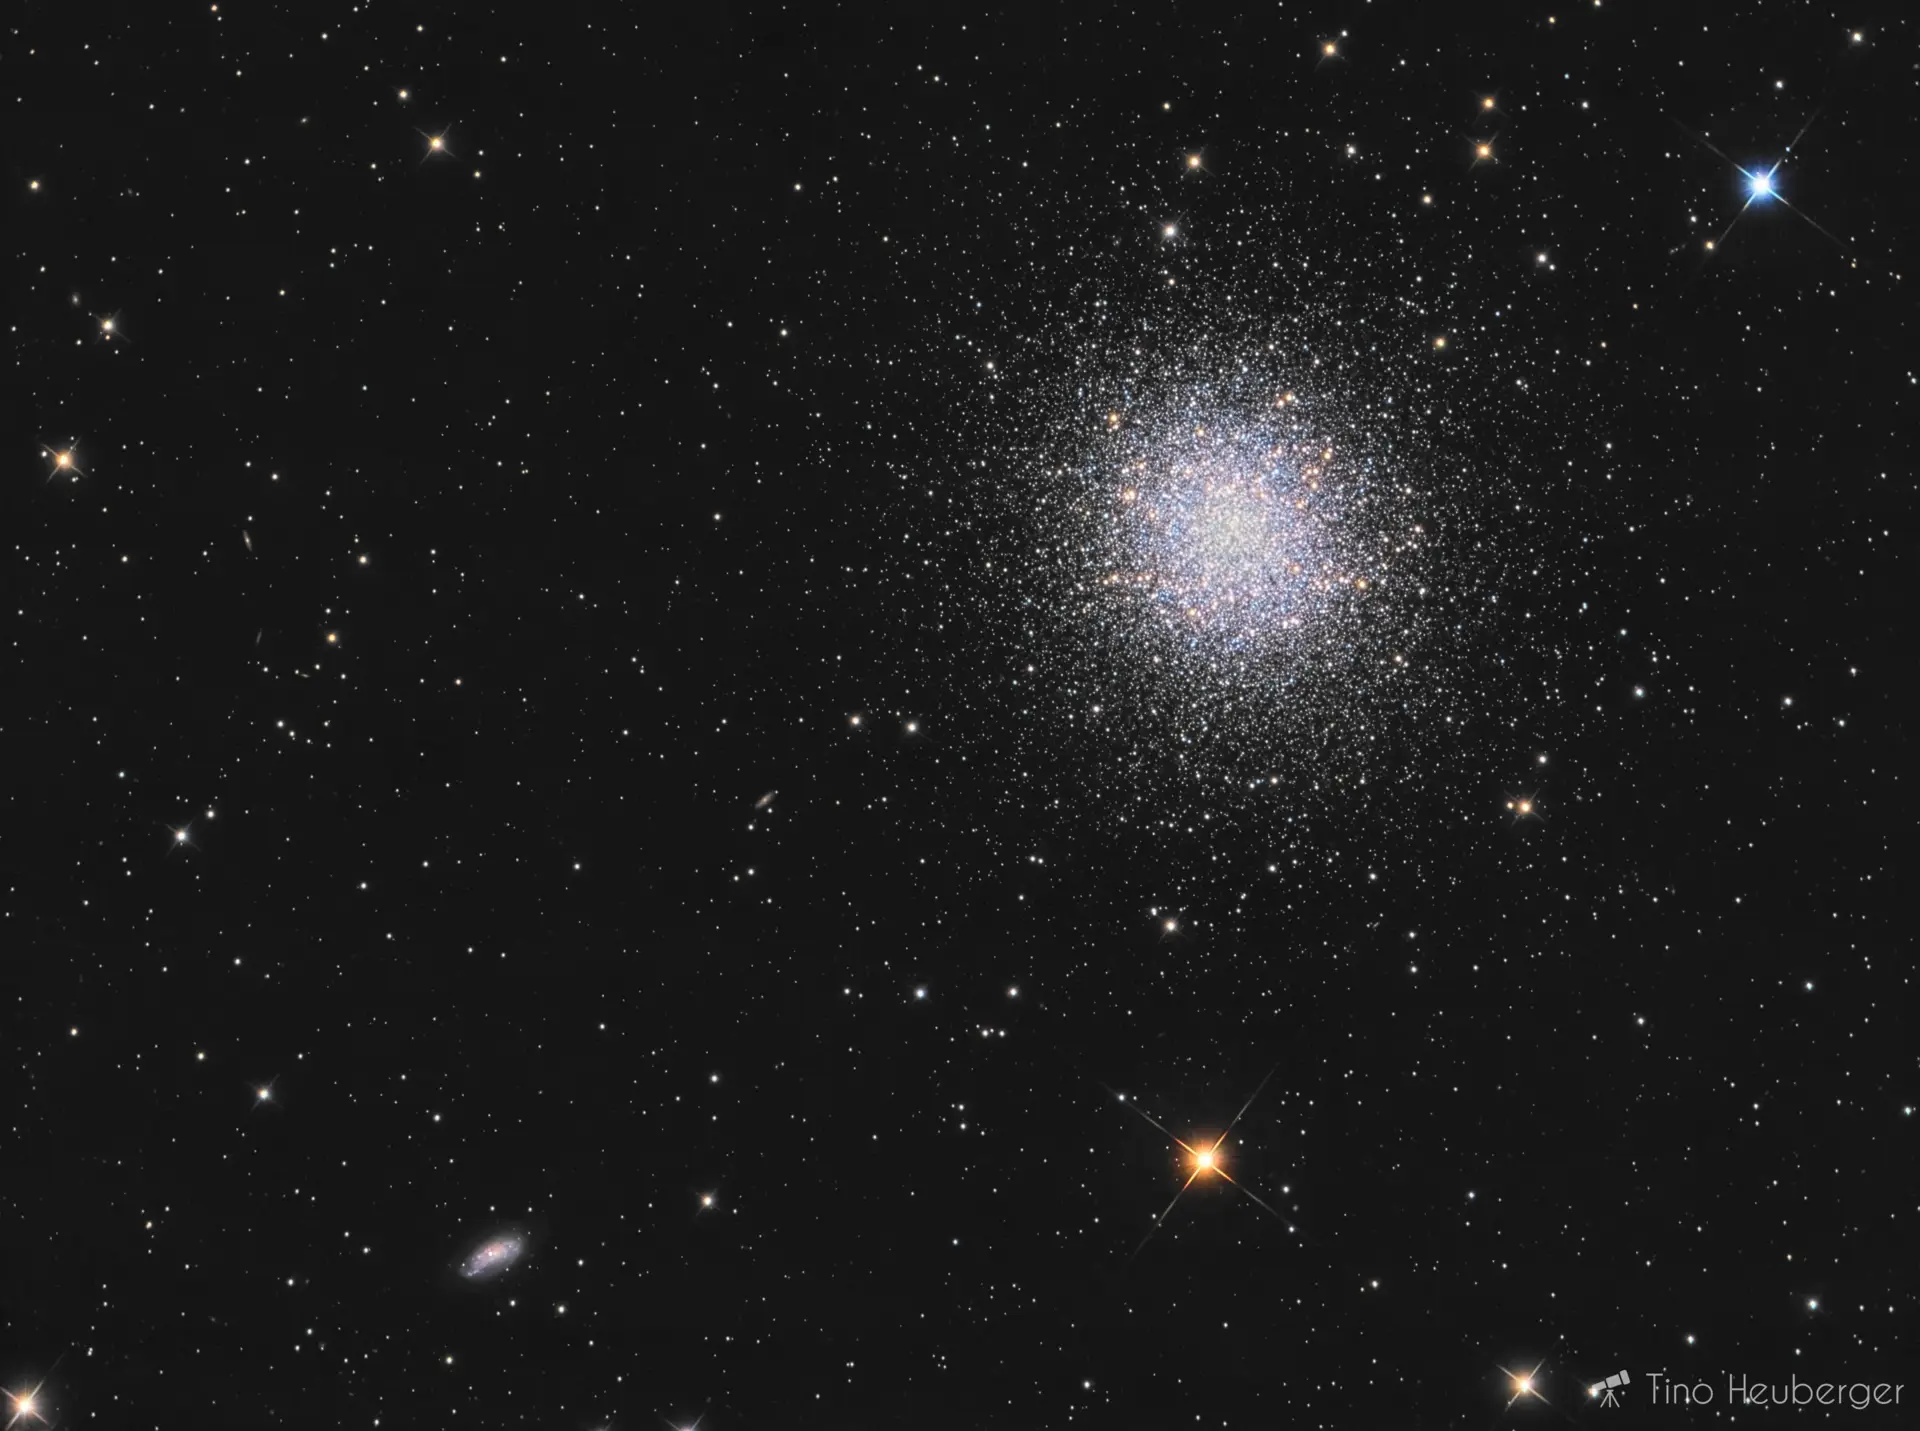 M13 - The famous Hercules star cluster